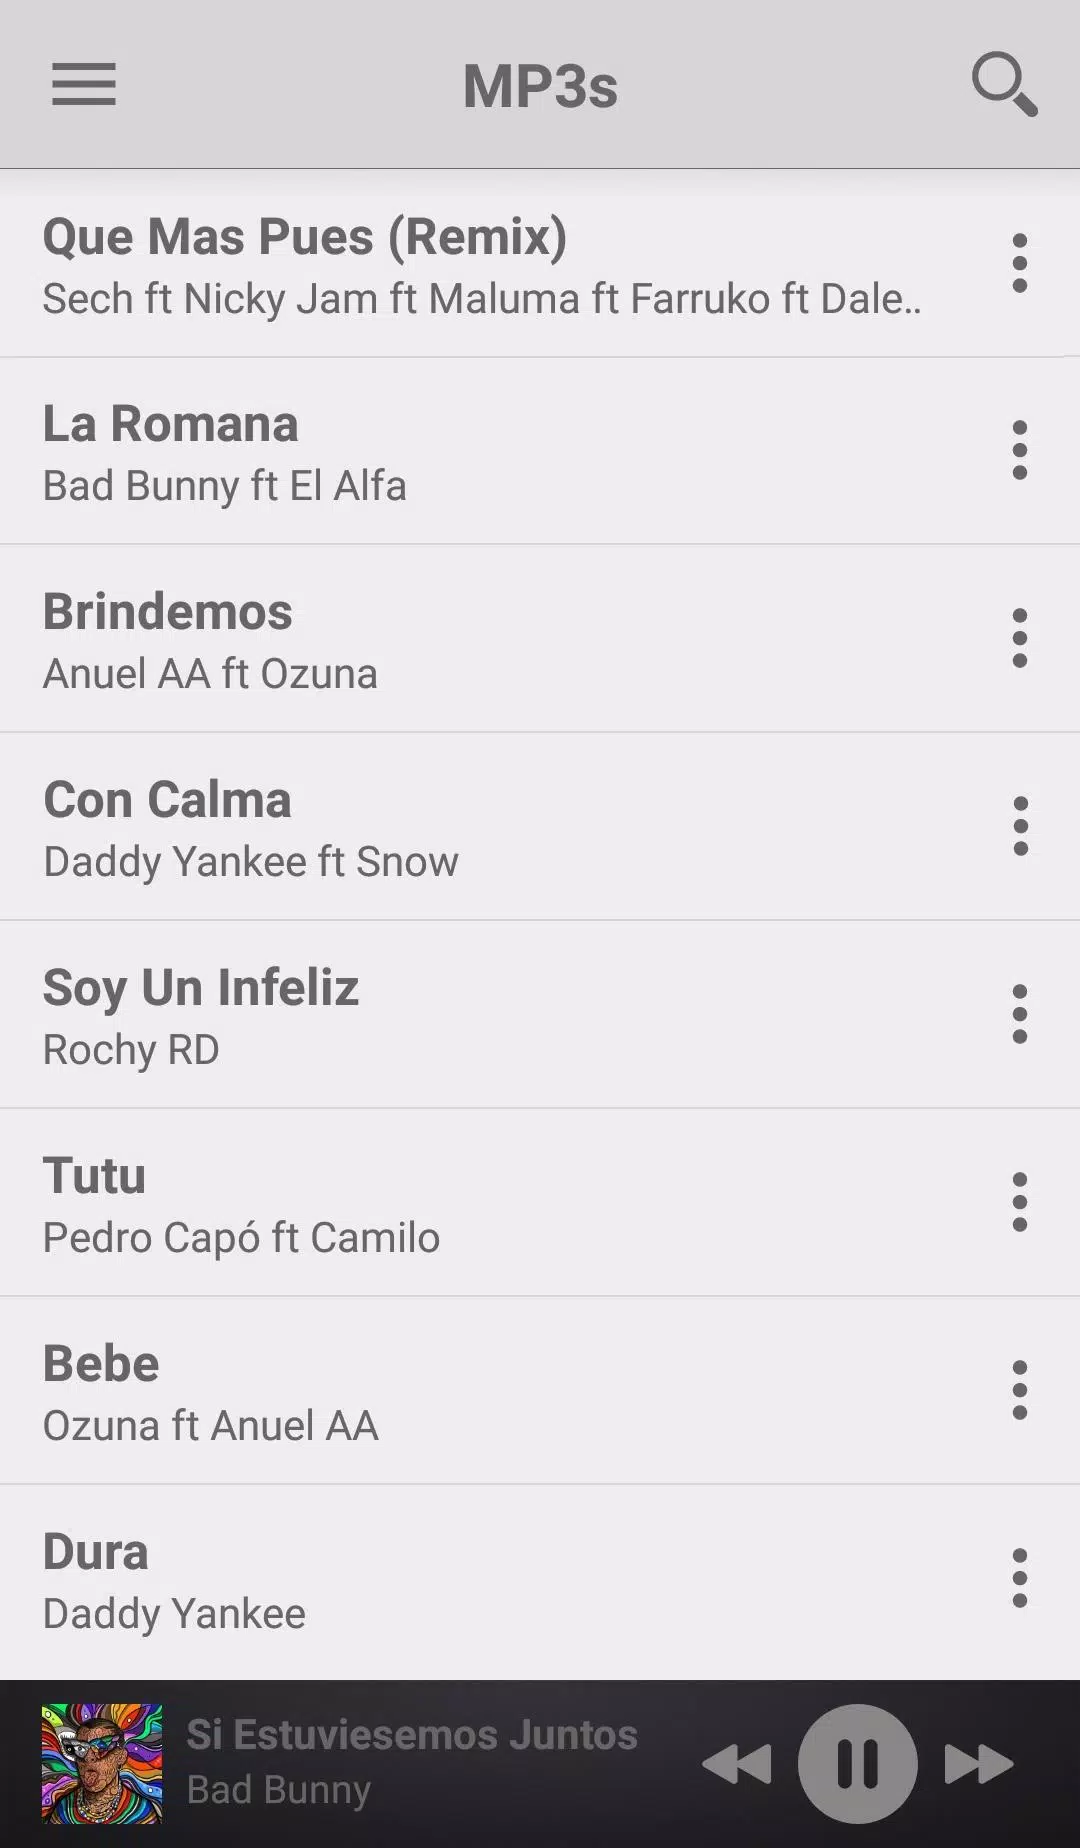 MP3teca APK for Android Download